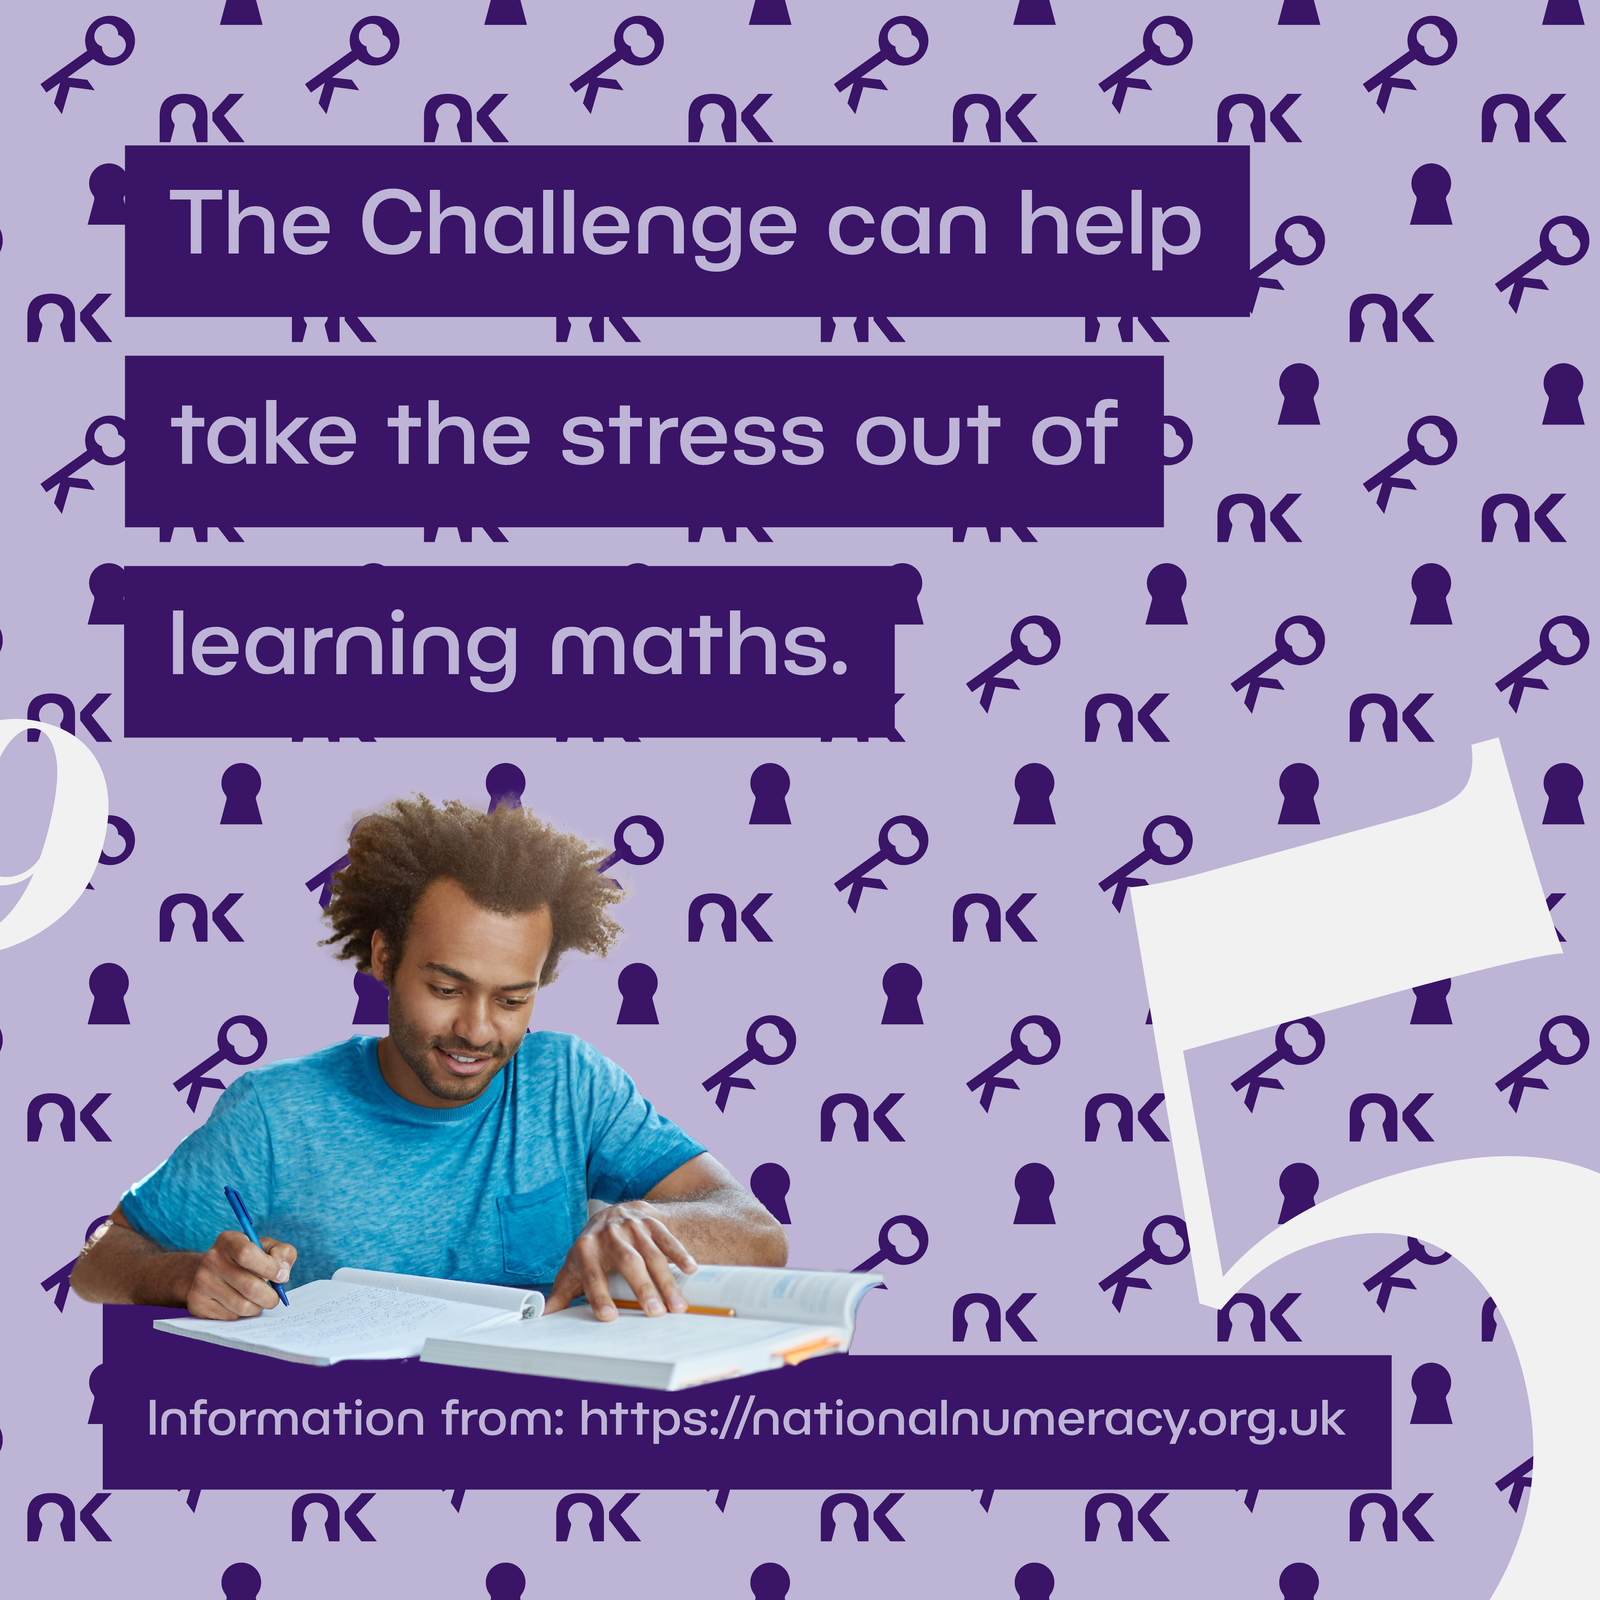 Text says: "The Challenge can help take the stress out of learning maths. Information from: https://nationalnumeracy.org.uk." next to a Black man reading and writing.